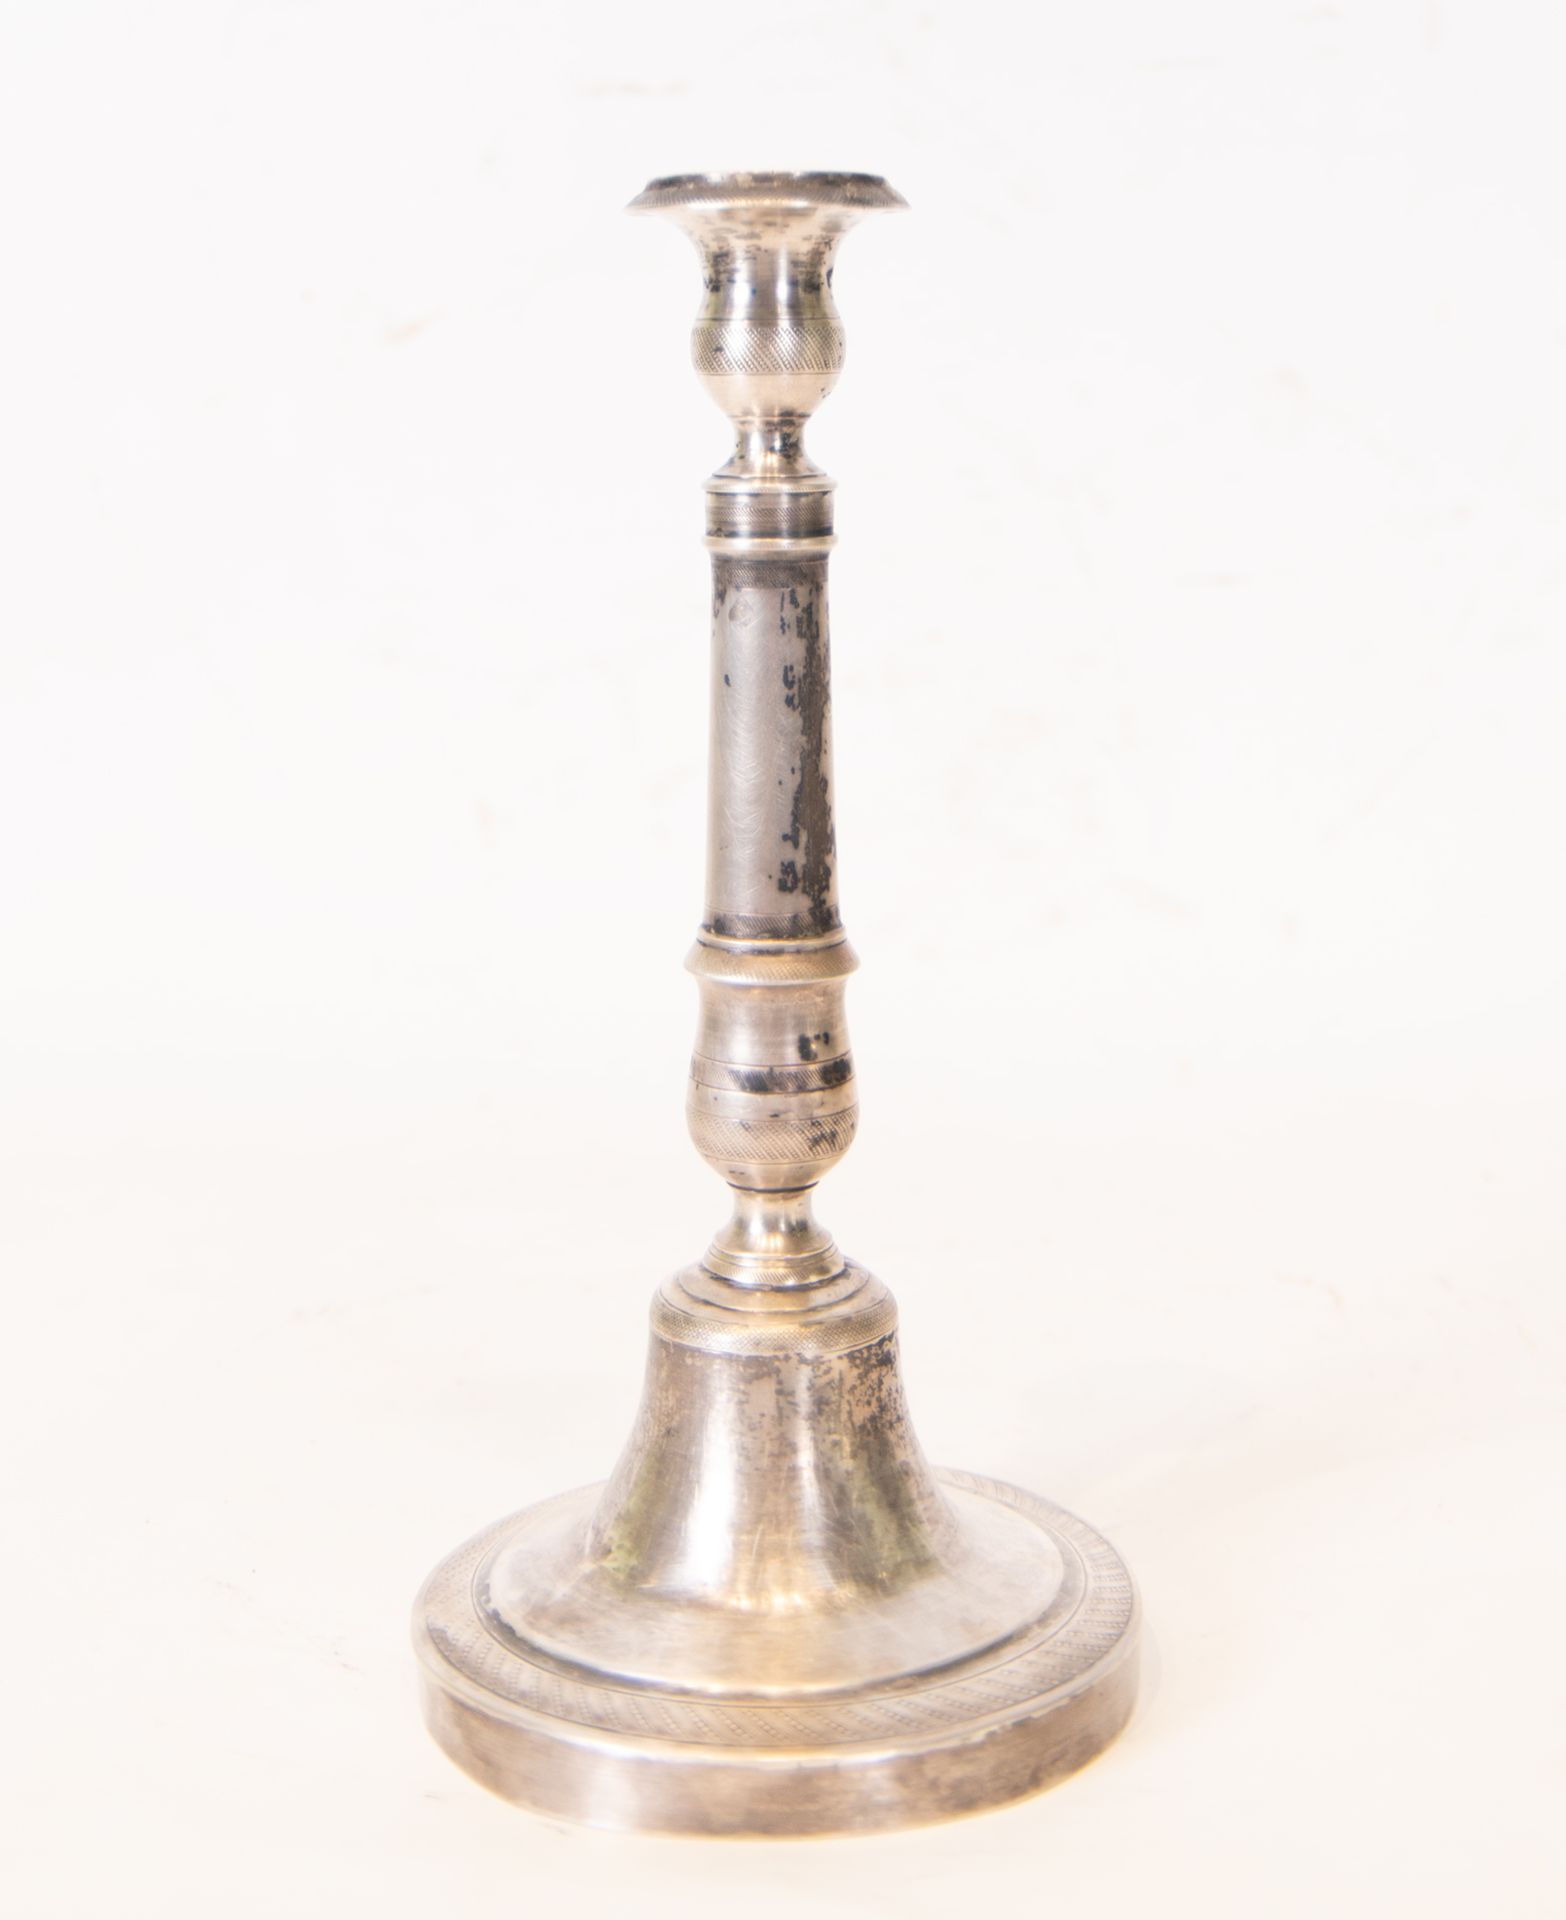 Pair of rare Fernandino candlesticks in solid silver, Spanish school of the 18th - 19th century - Image 8 of 8